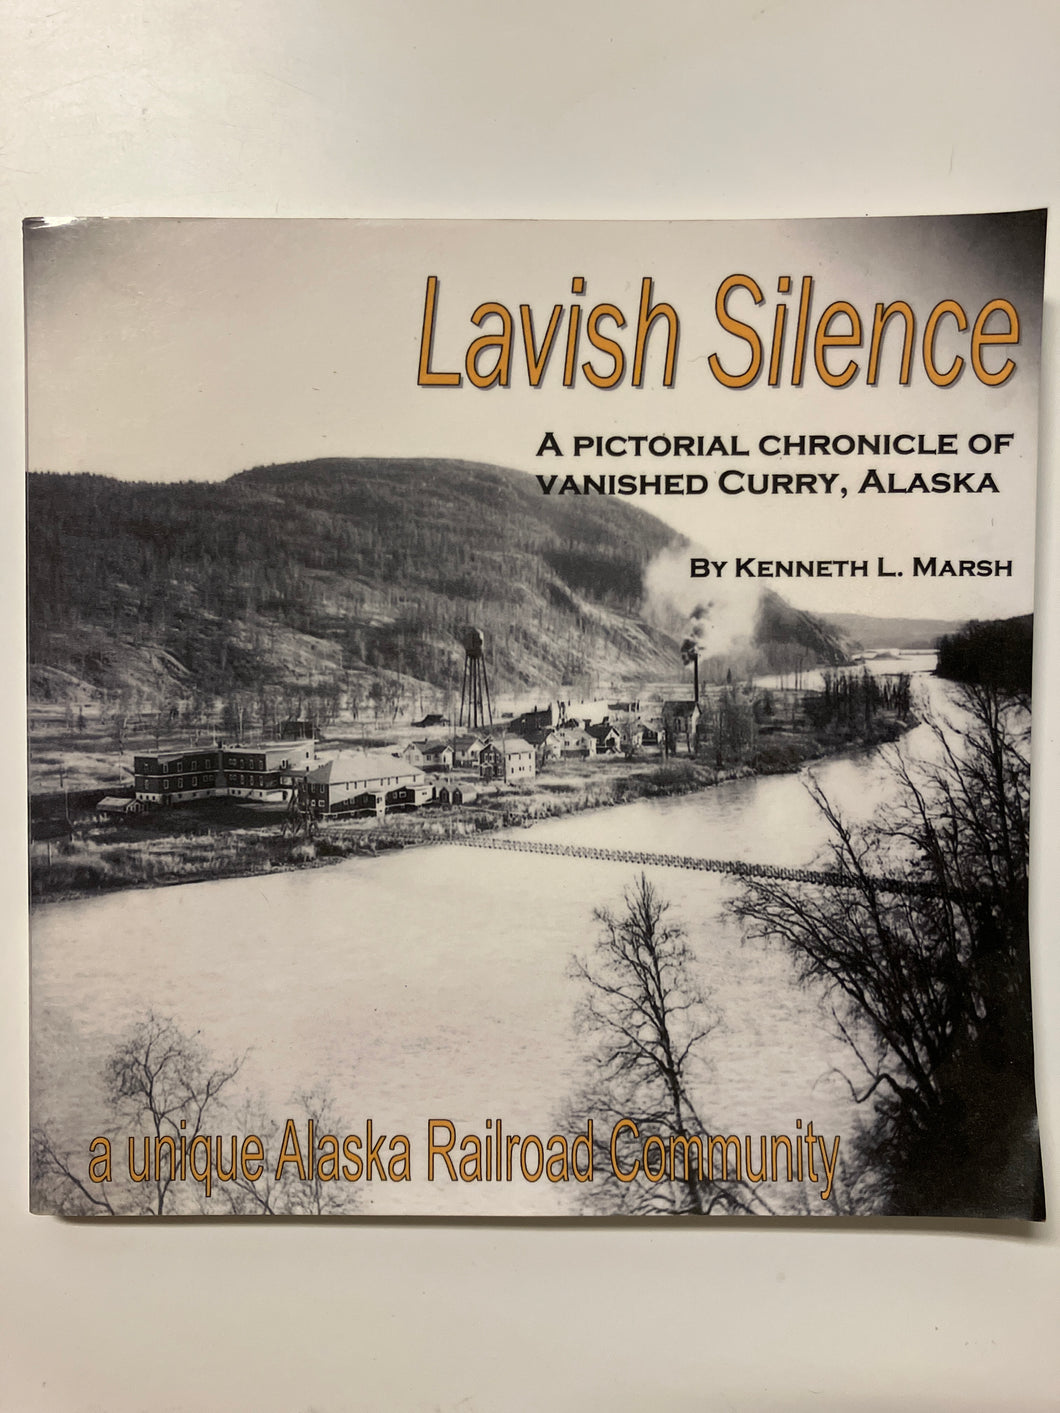 Lavish Silence A Pictorial Chronicle of Vanished Curry, Alaska - Slick Cat Books 